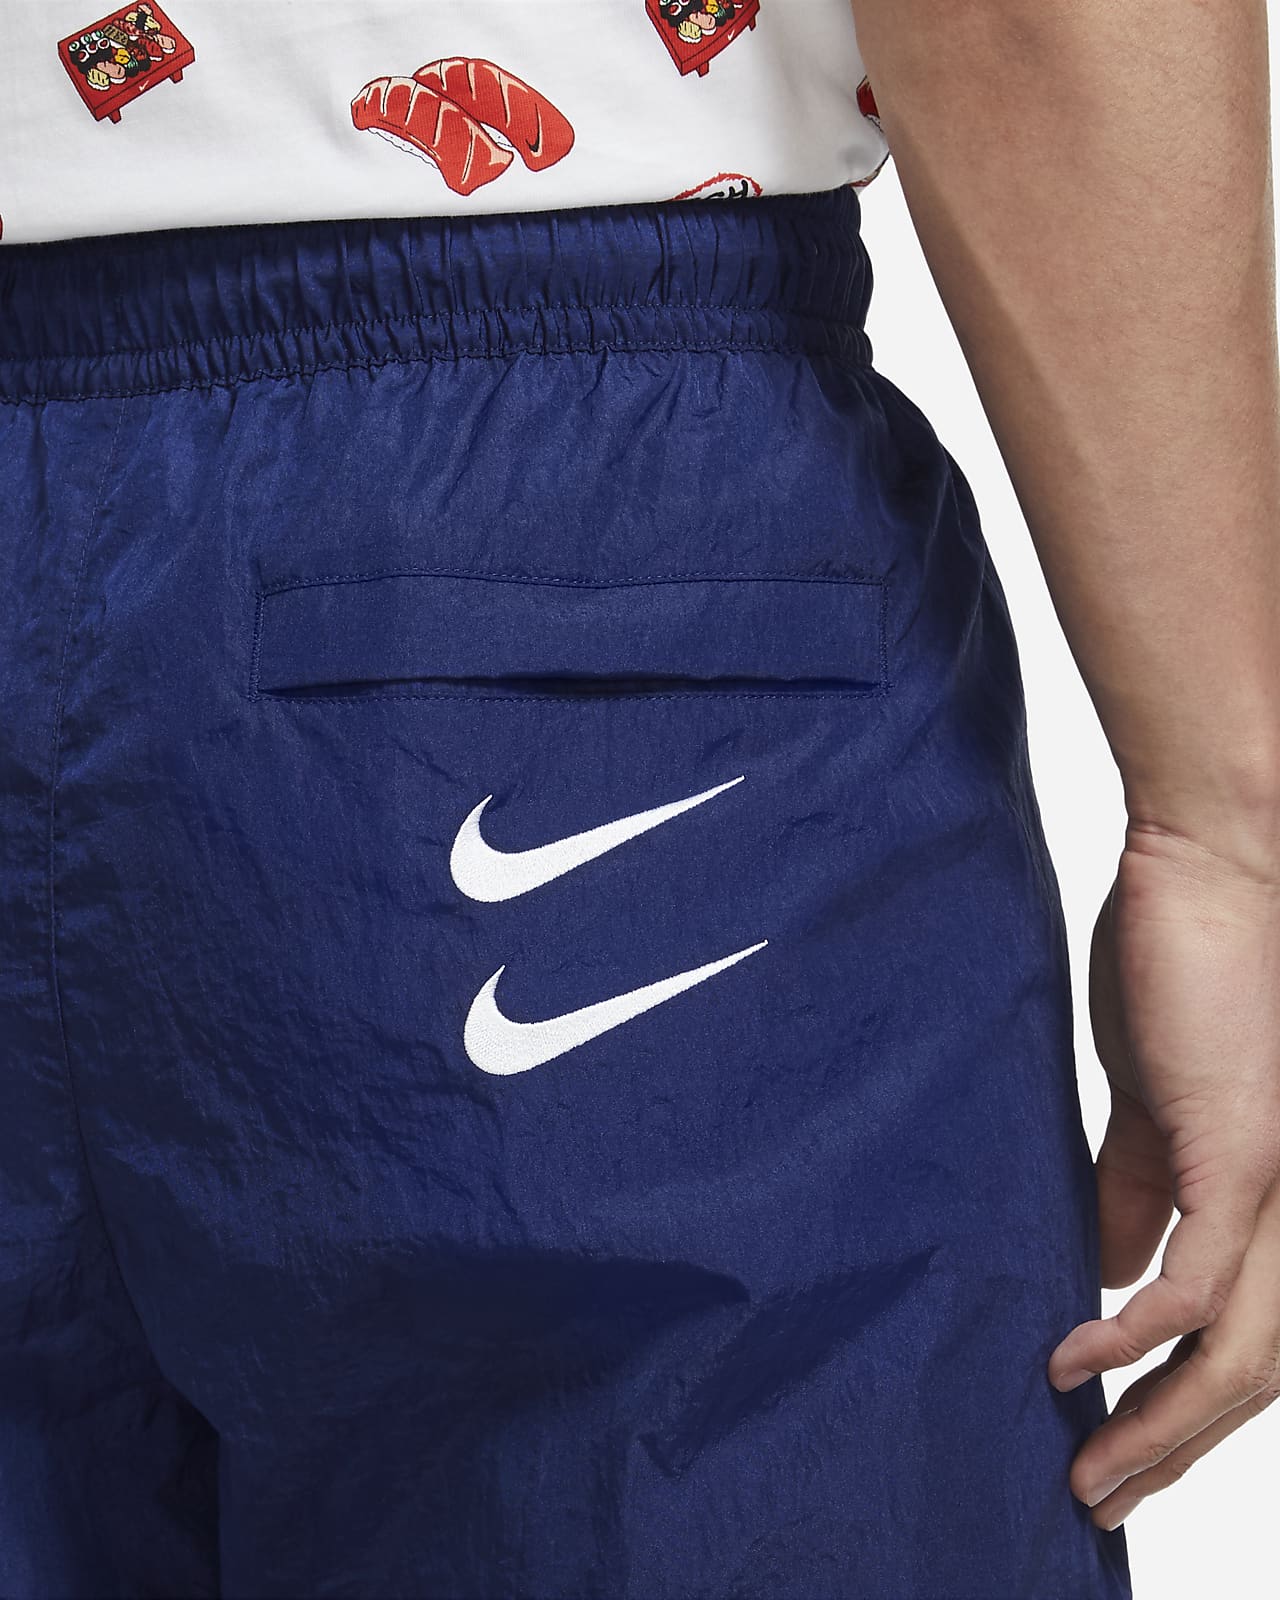 Shop Nike Casual Style Unisex Street Style Plain Logo Pants (DQ5616-133,  DQ5616-010) by ウッドボーイ